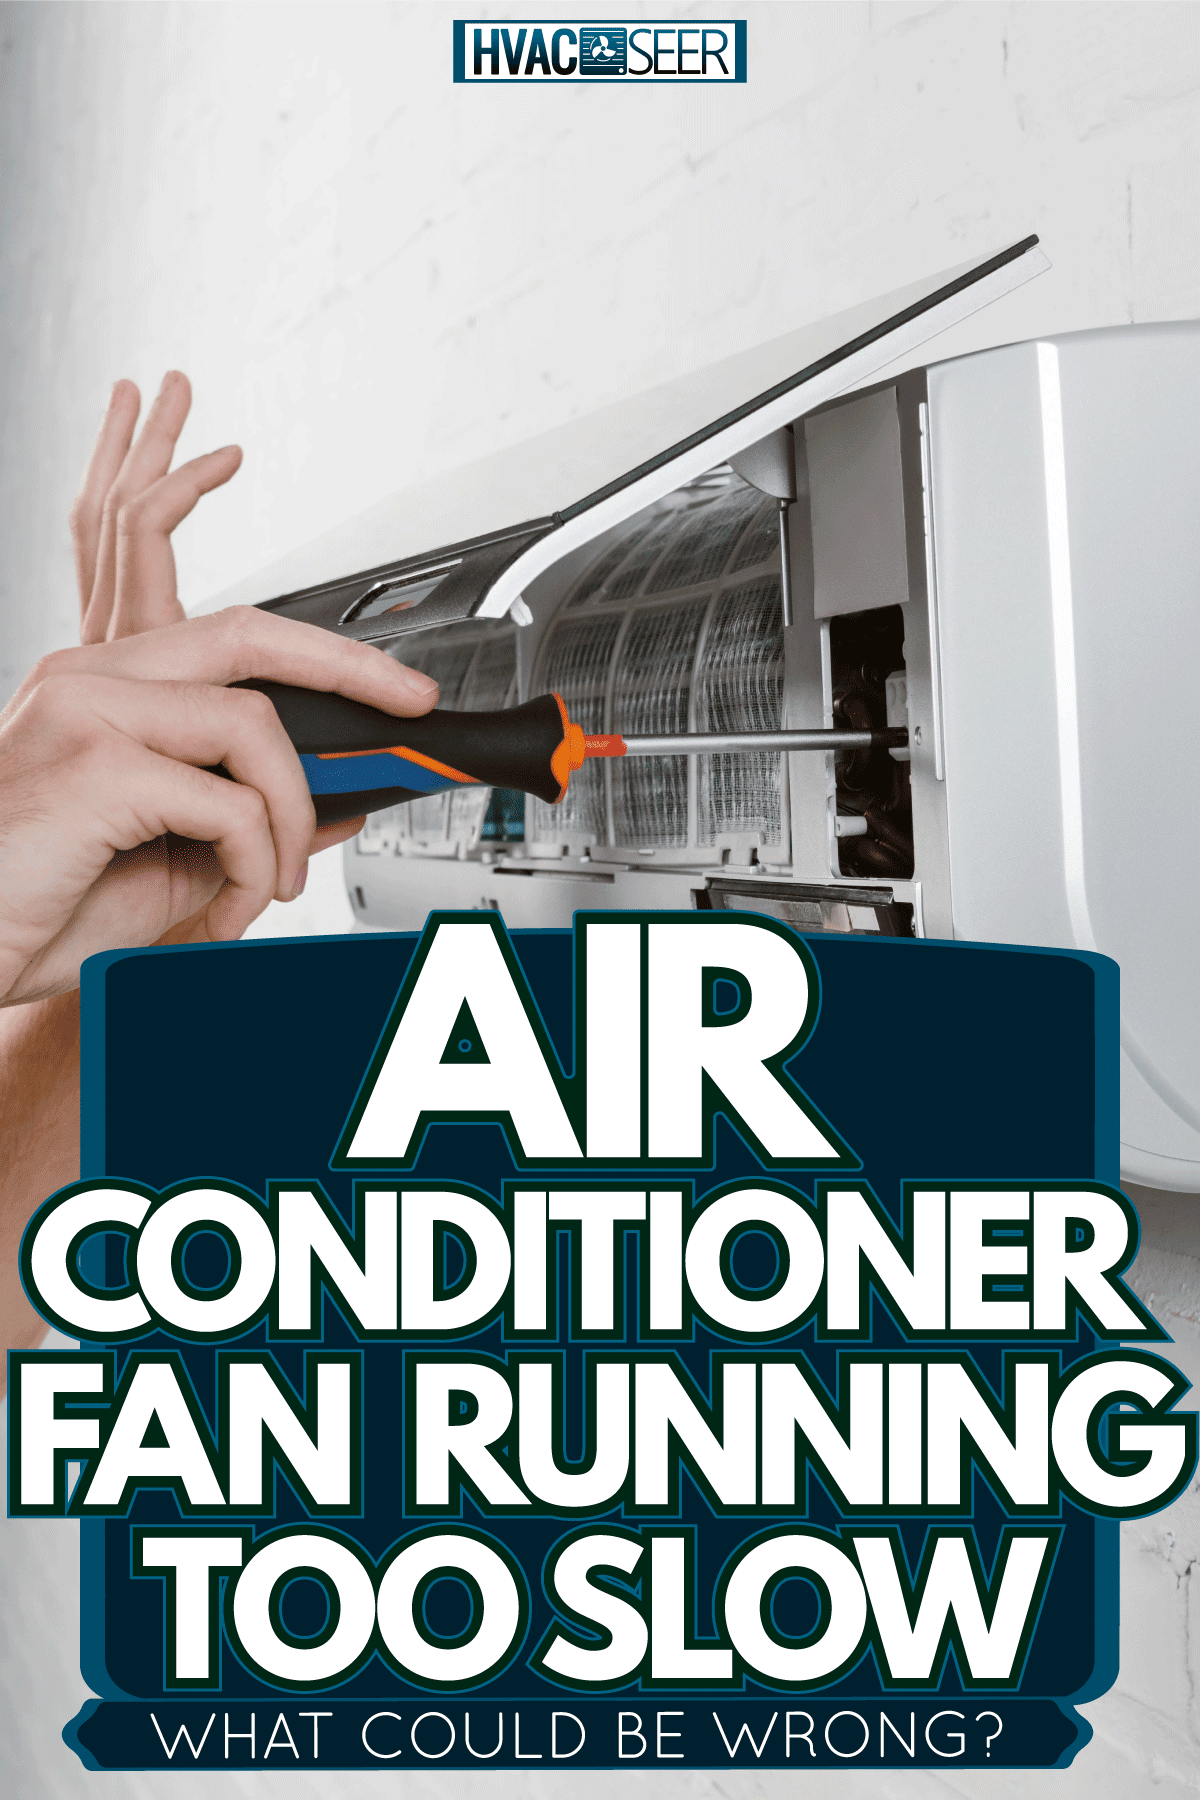 Technician repairing the air conditioning unit, Air Conditioner Fan Running Too Slow—What Could Be Wrong?